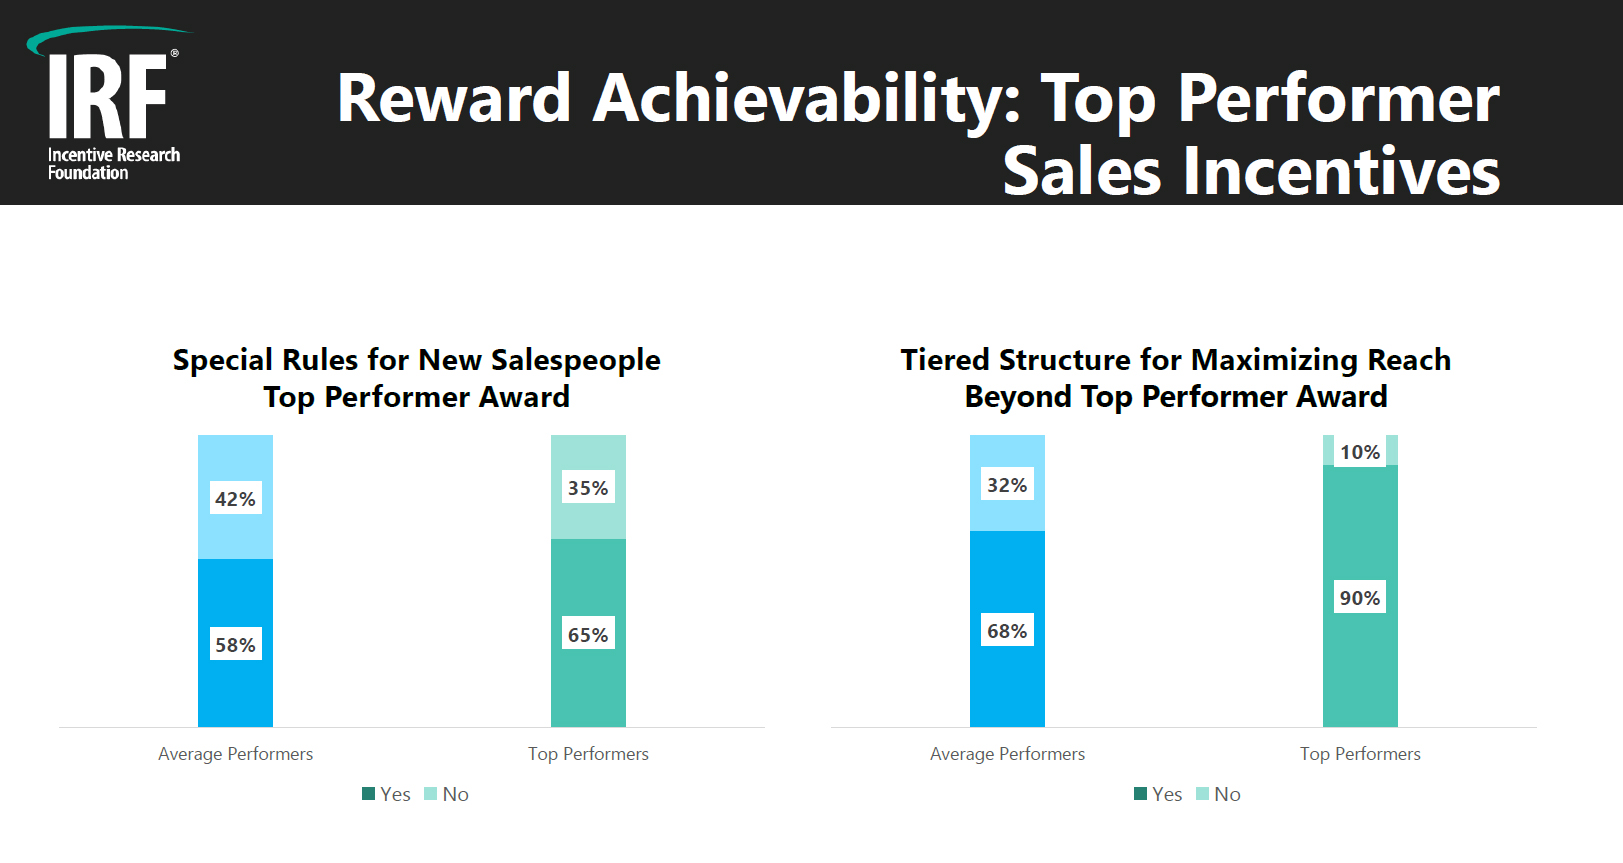 Top Performer Sales Incentives